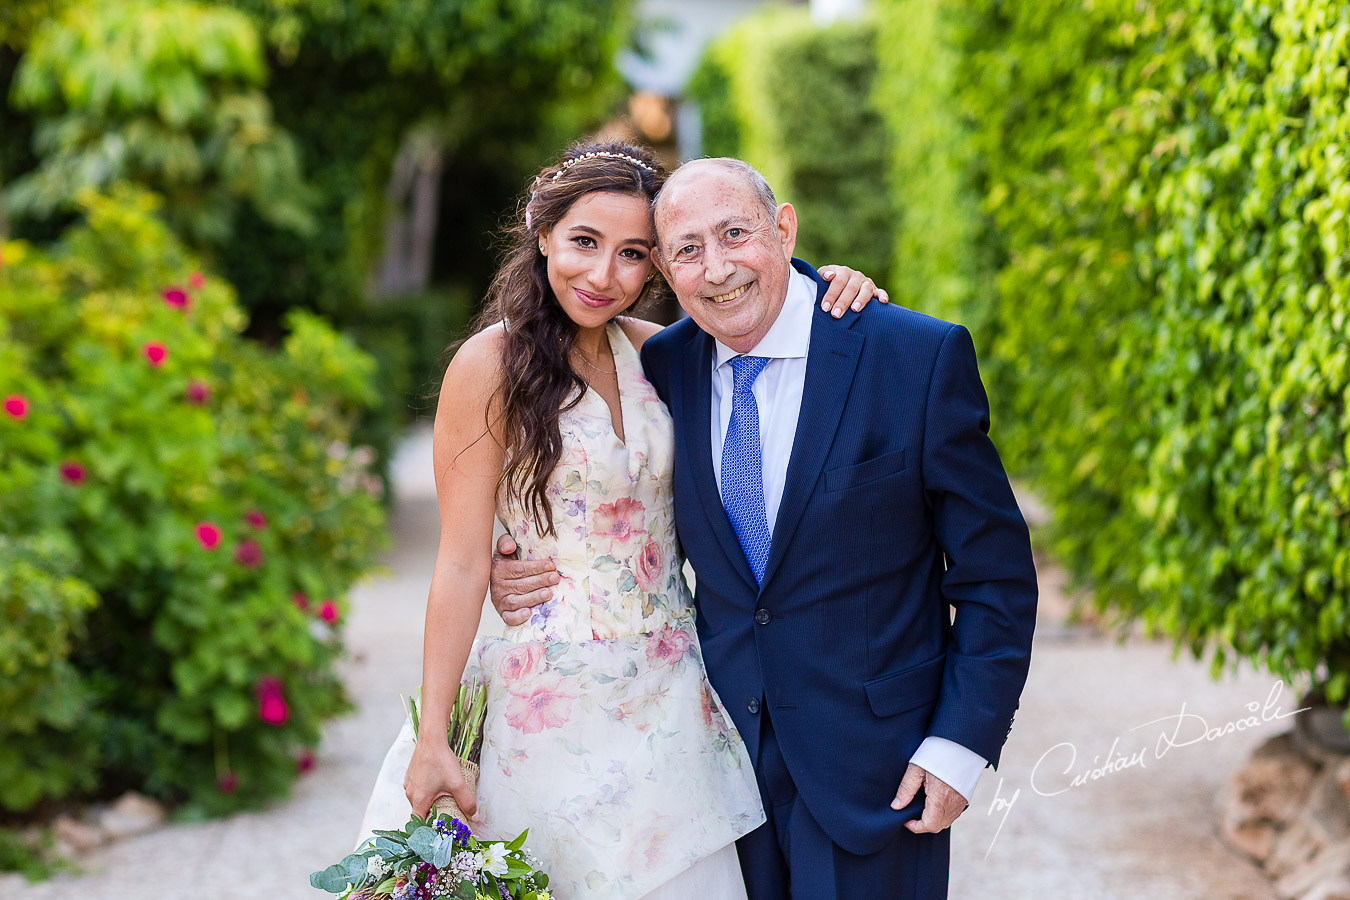 Portrait with the bride and her father photographed as part of an Exclusive Wedding photography at Grand Resort Limassol, captured by Cyprus Wedding Photographer Cristian Dascalu.